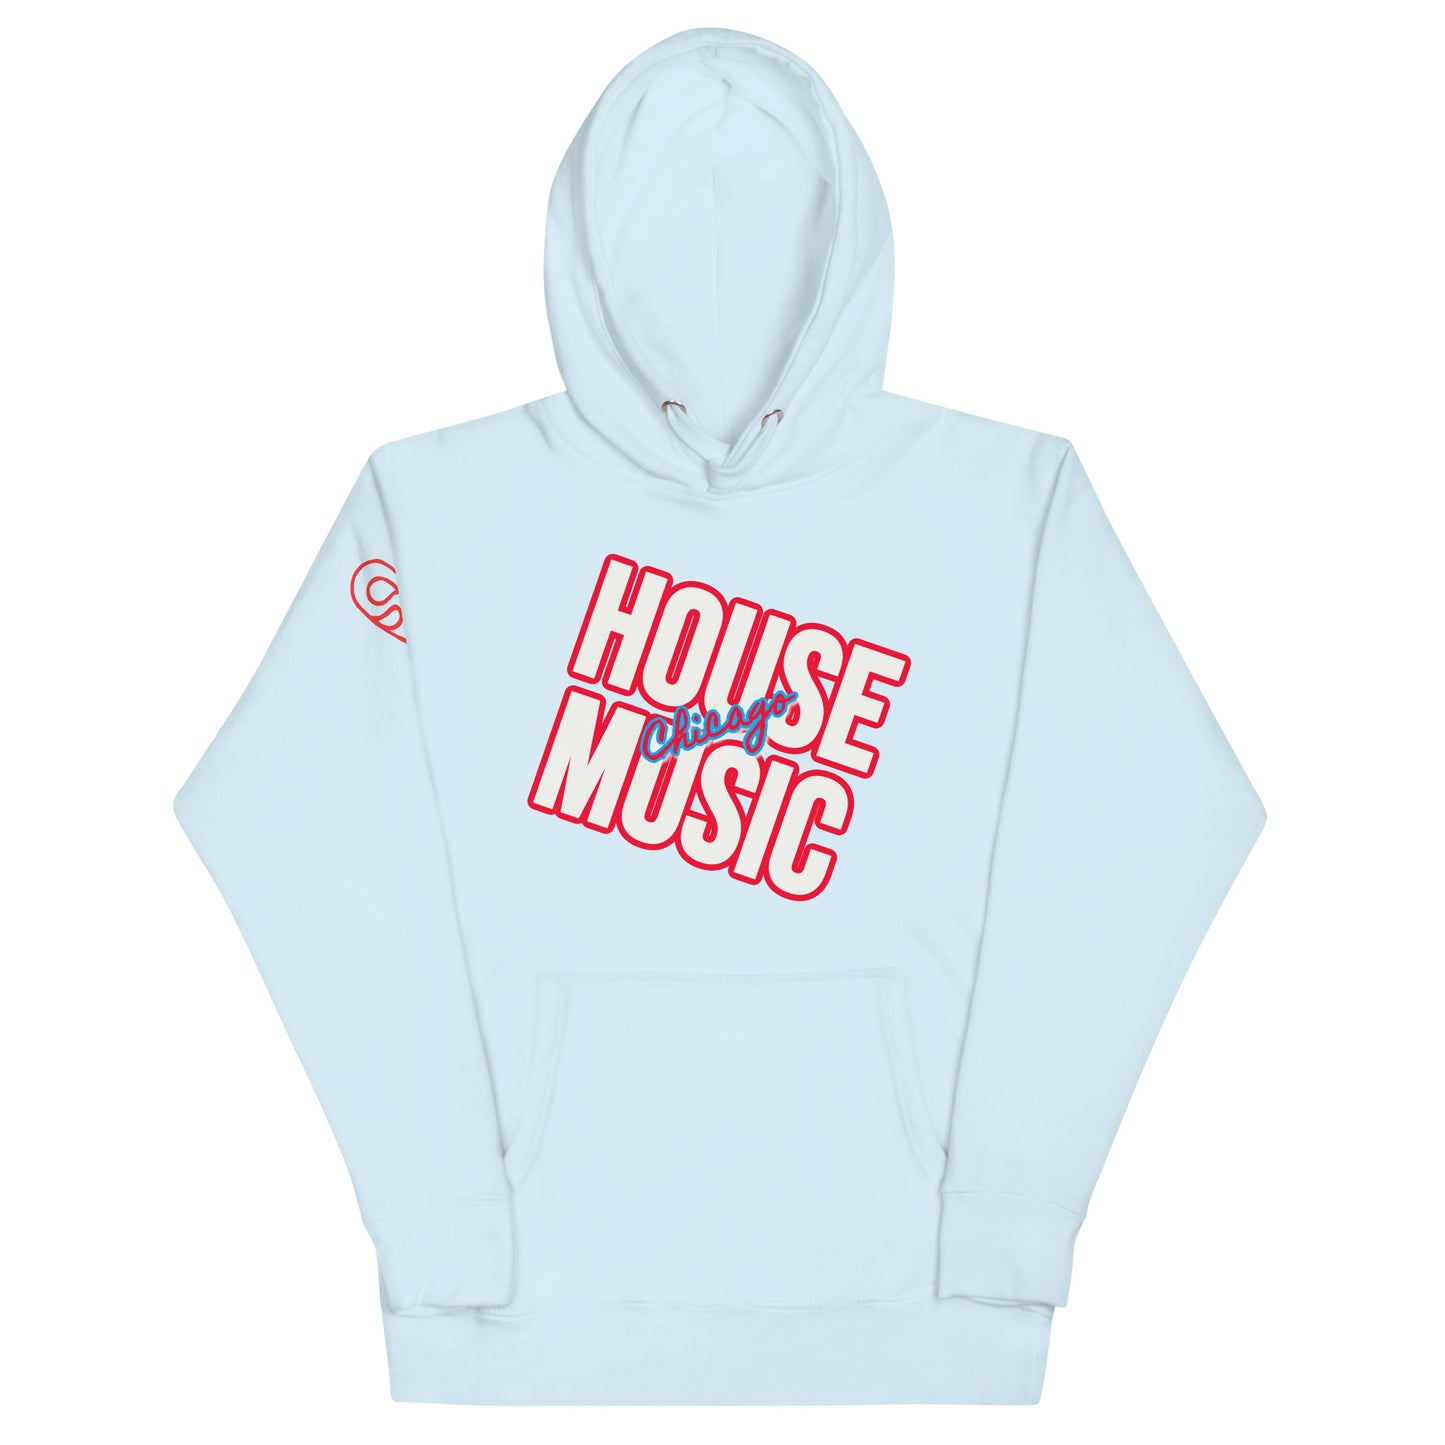 House Music Chicago - White Letters - Hoodie